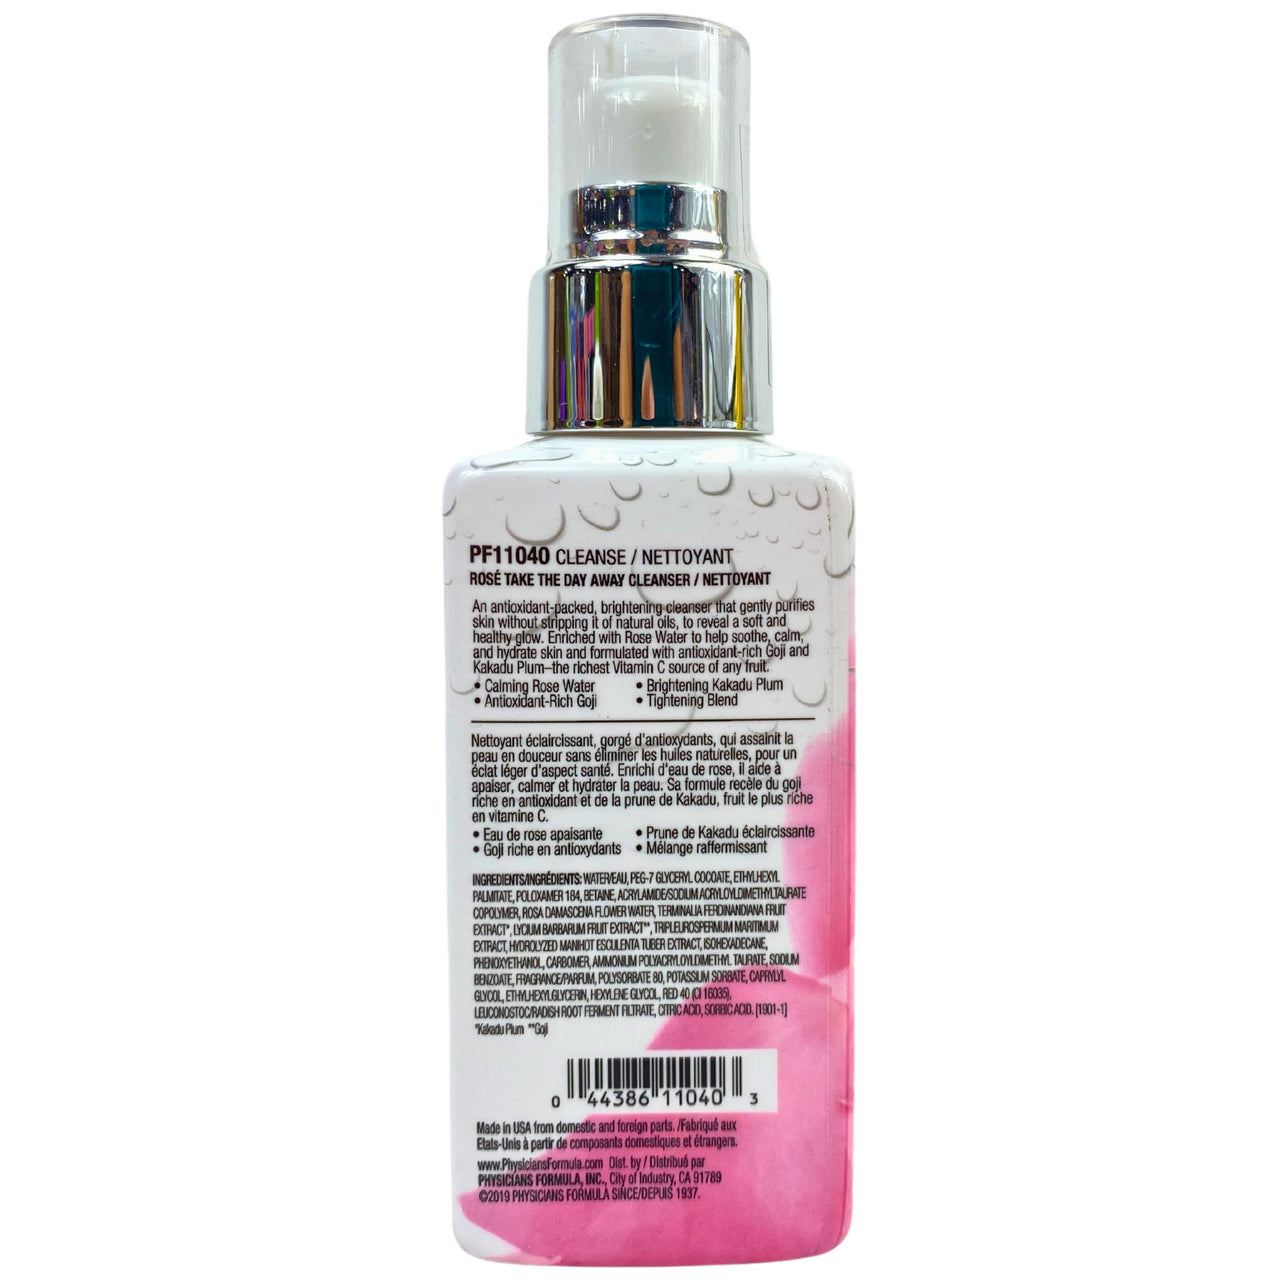 Physicians Formula Rose Take The Day Away Cleanser Brightens & Tightens